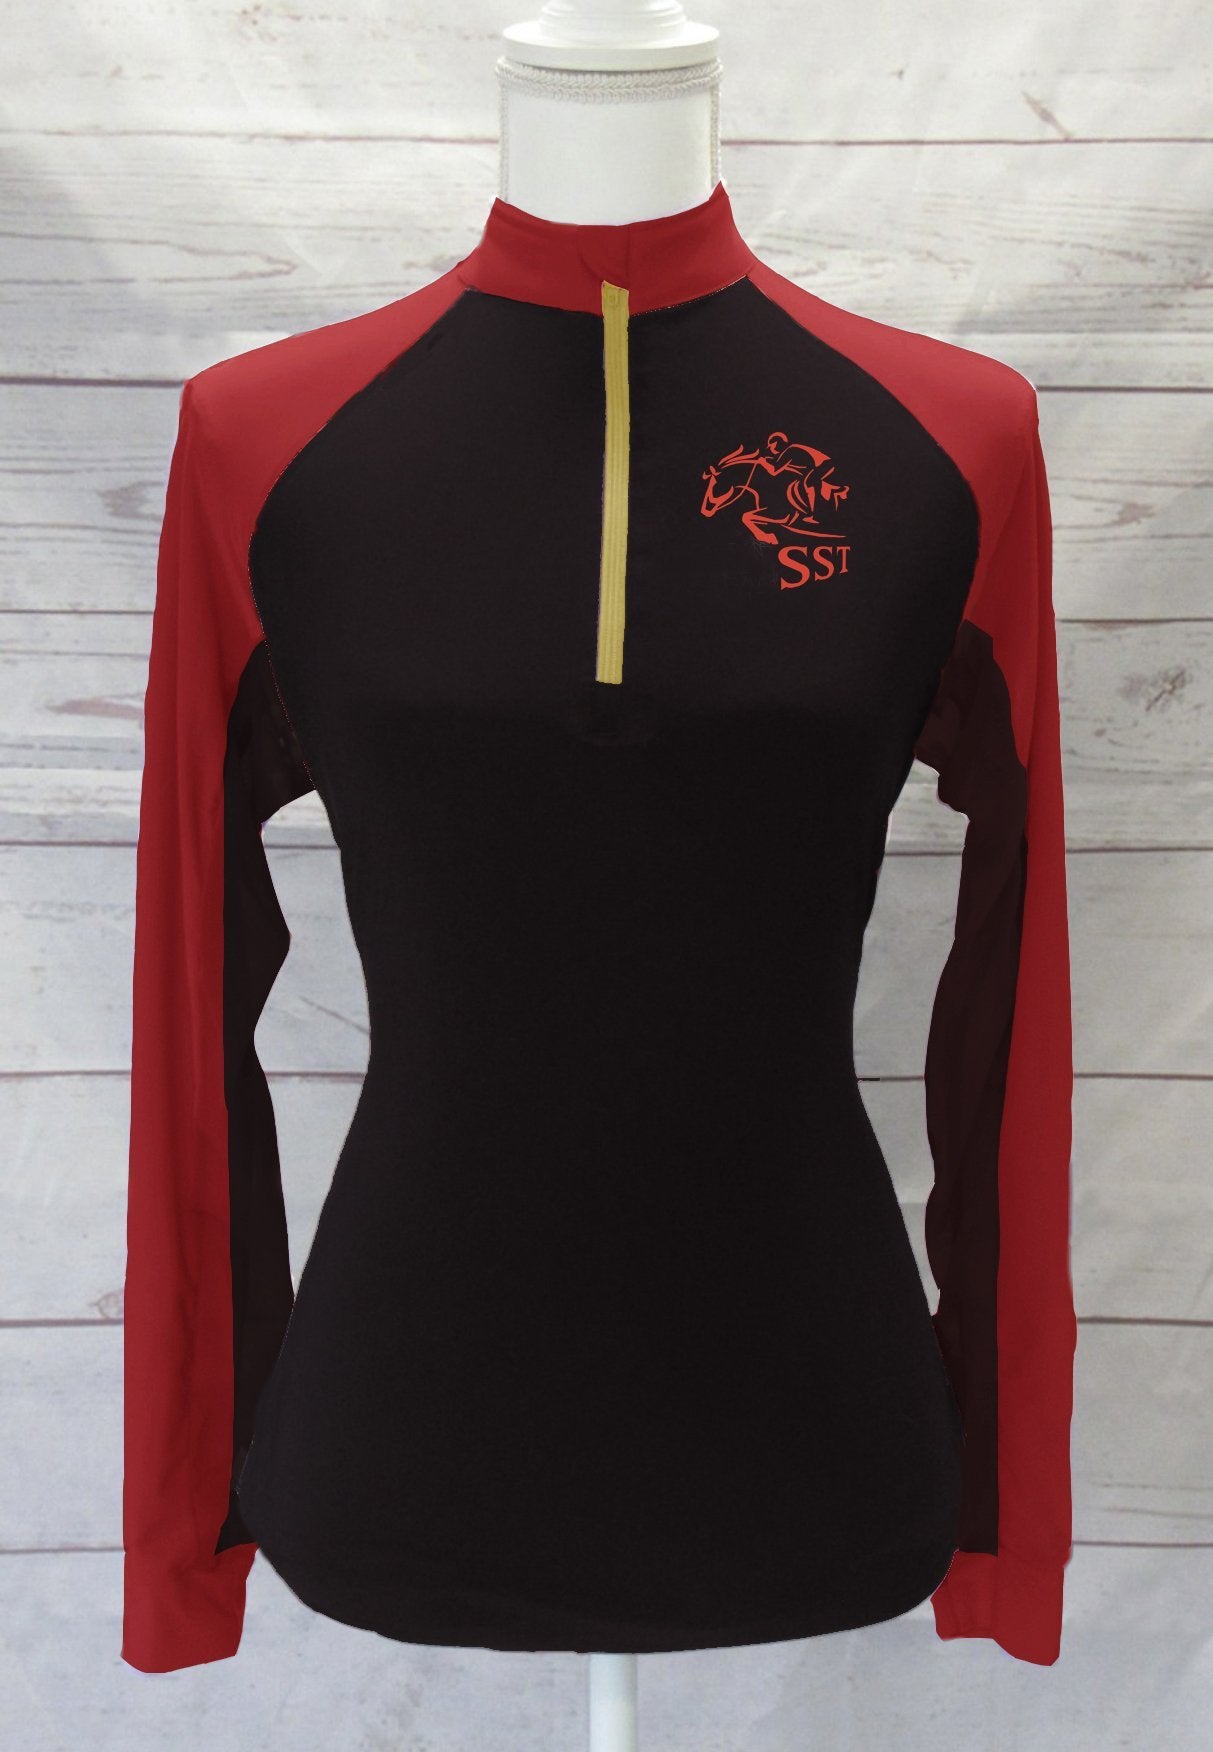 SST Adult Custom Sun Shirt - Black with Red Accents